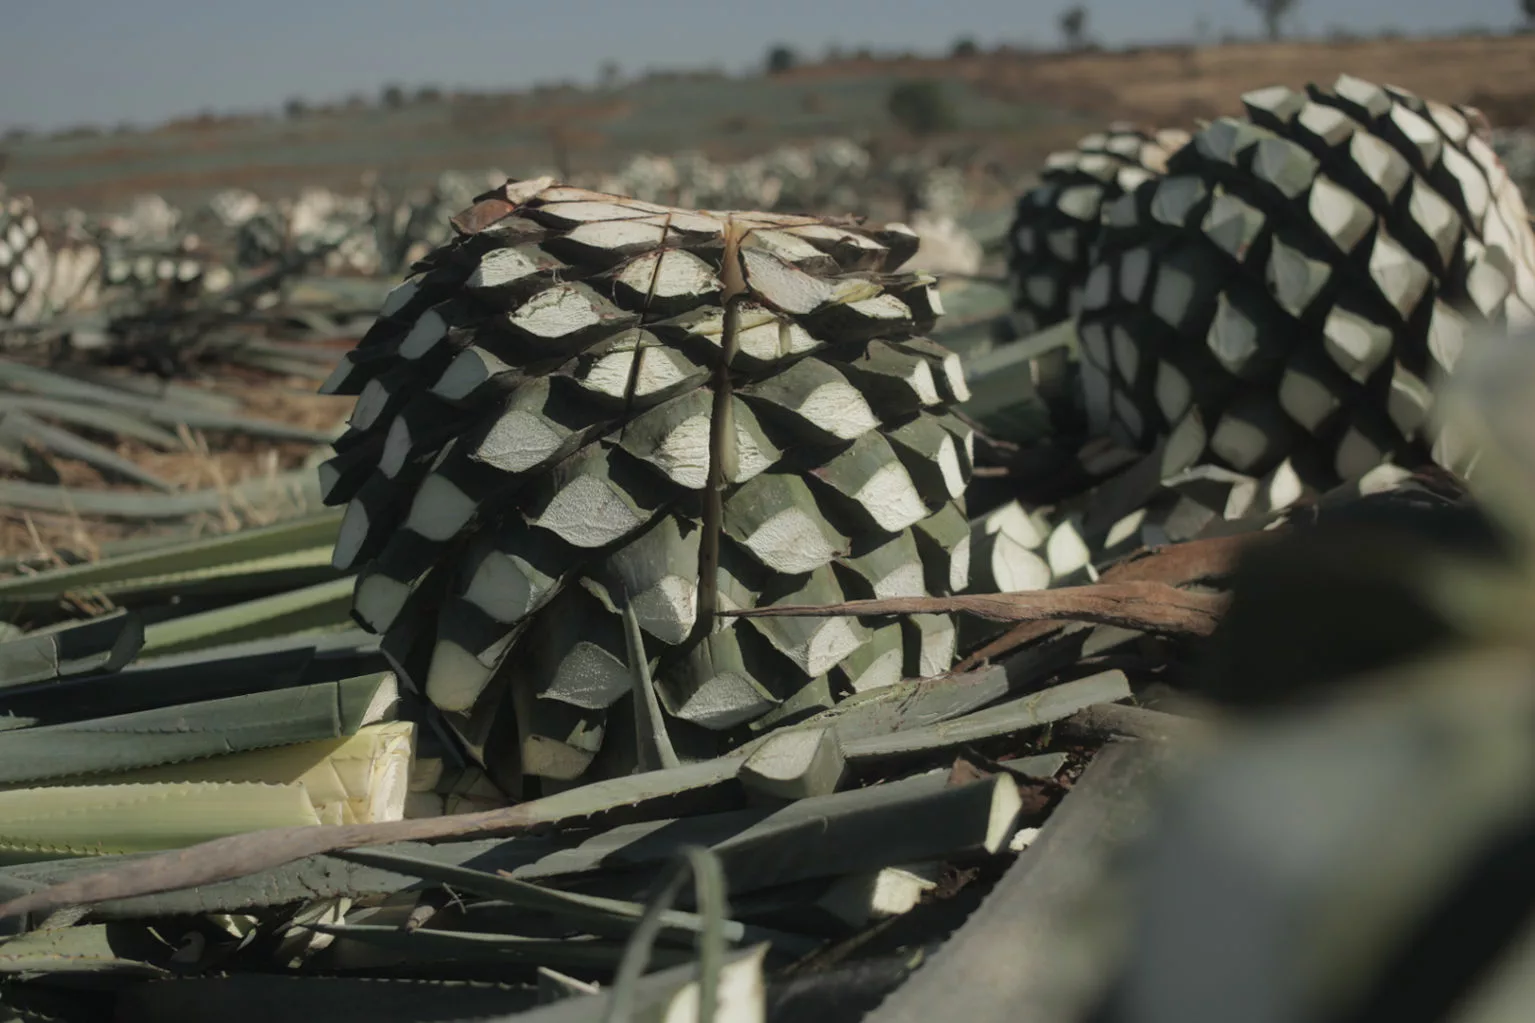 Harvested agave hearts, the key ingredient in agave tequila.